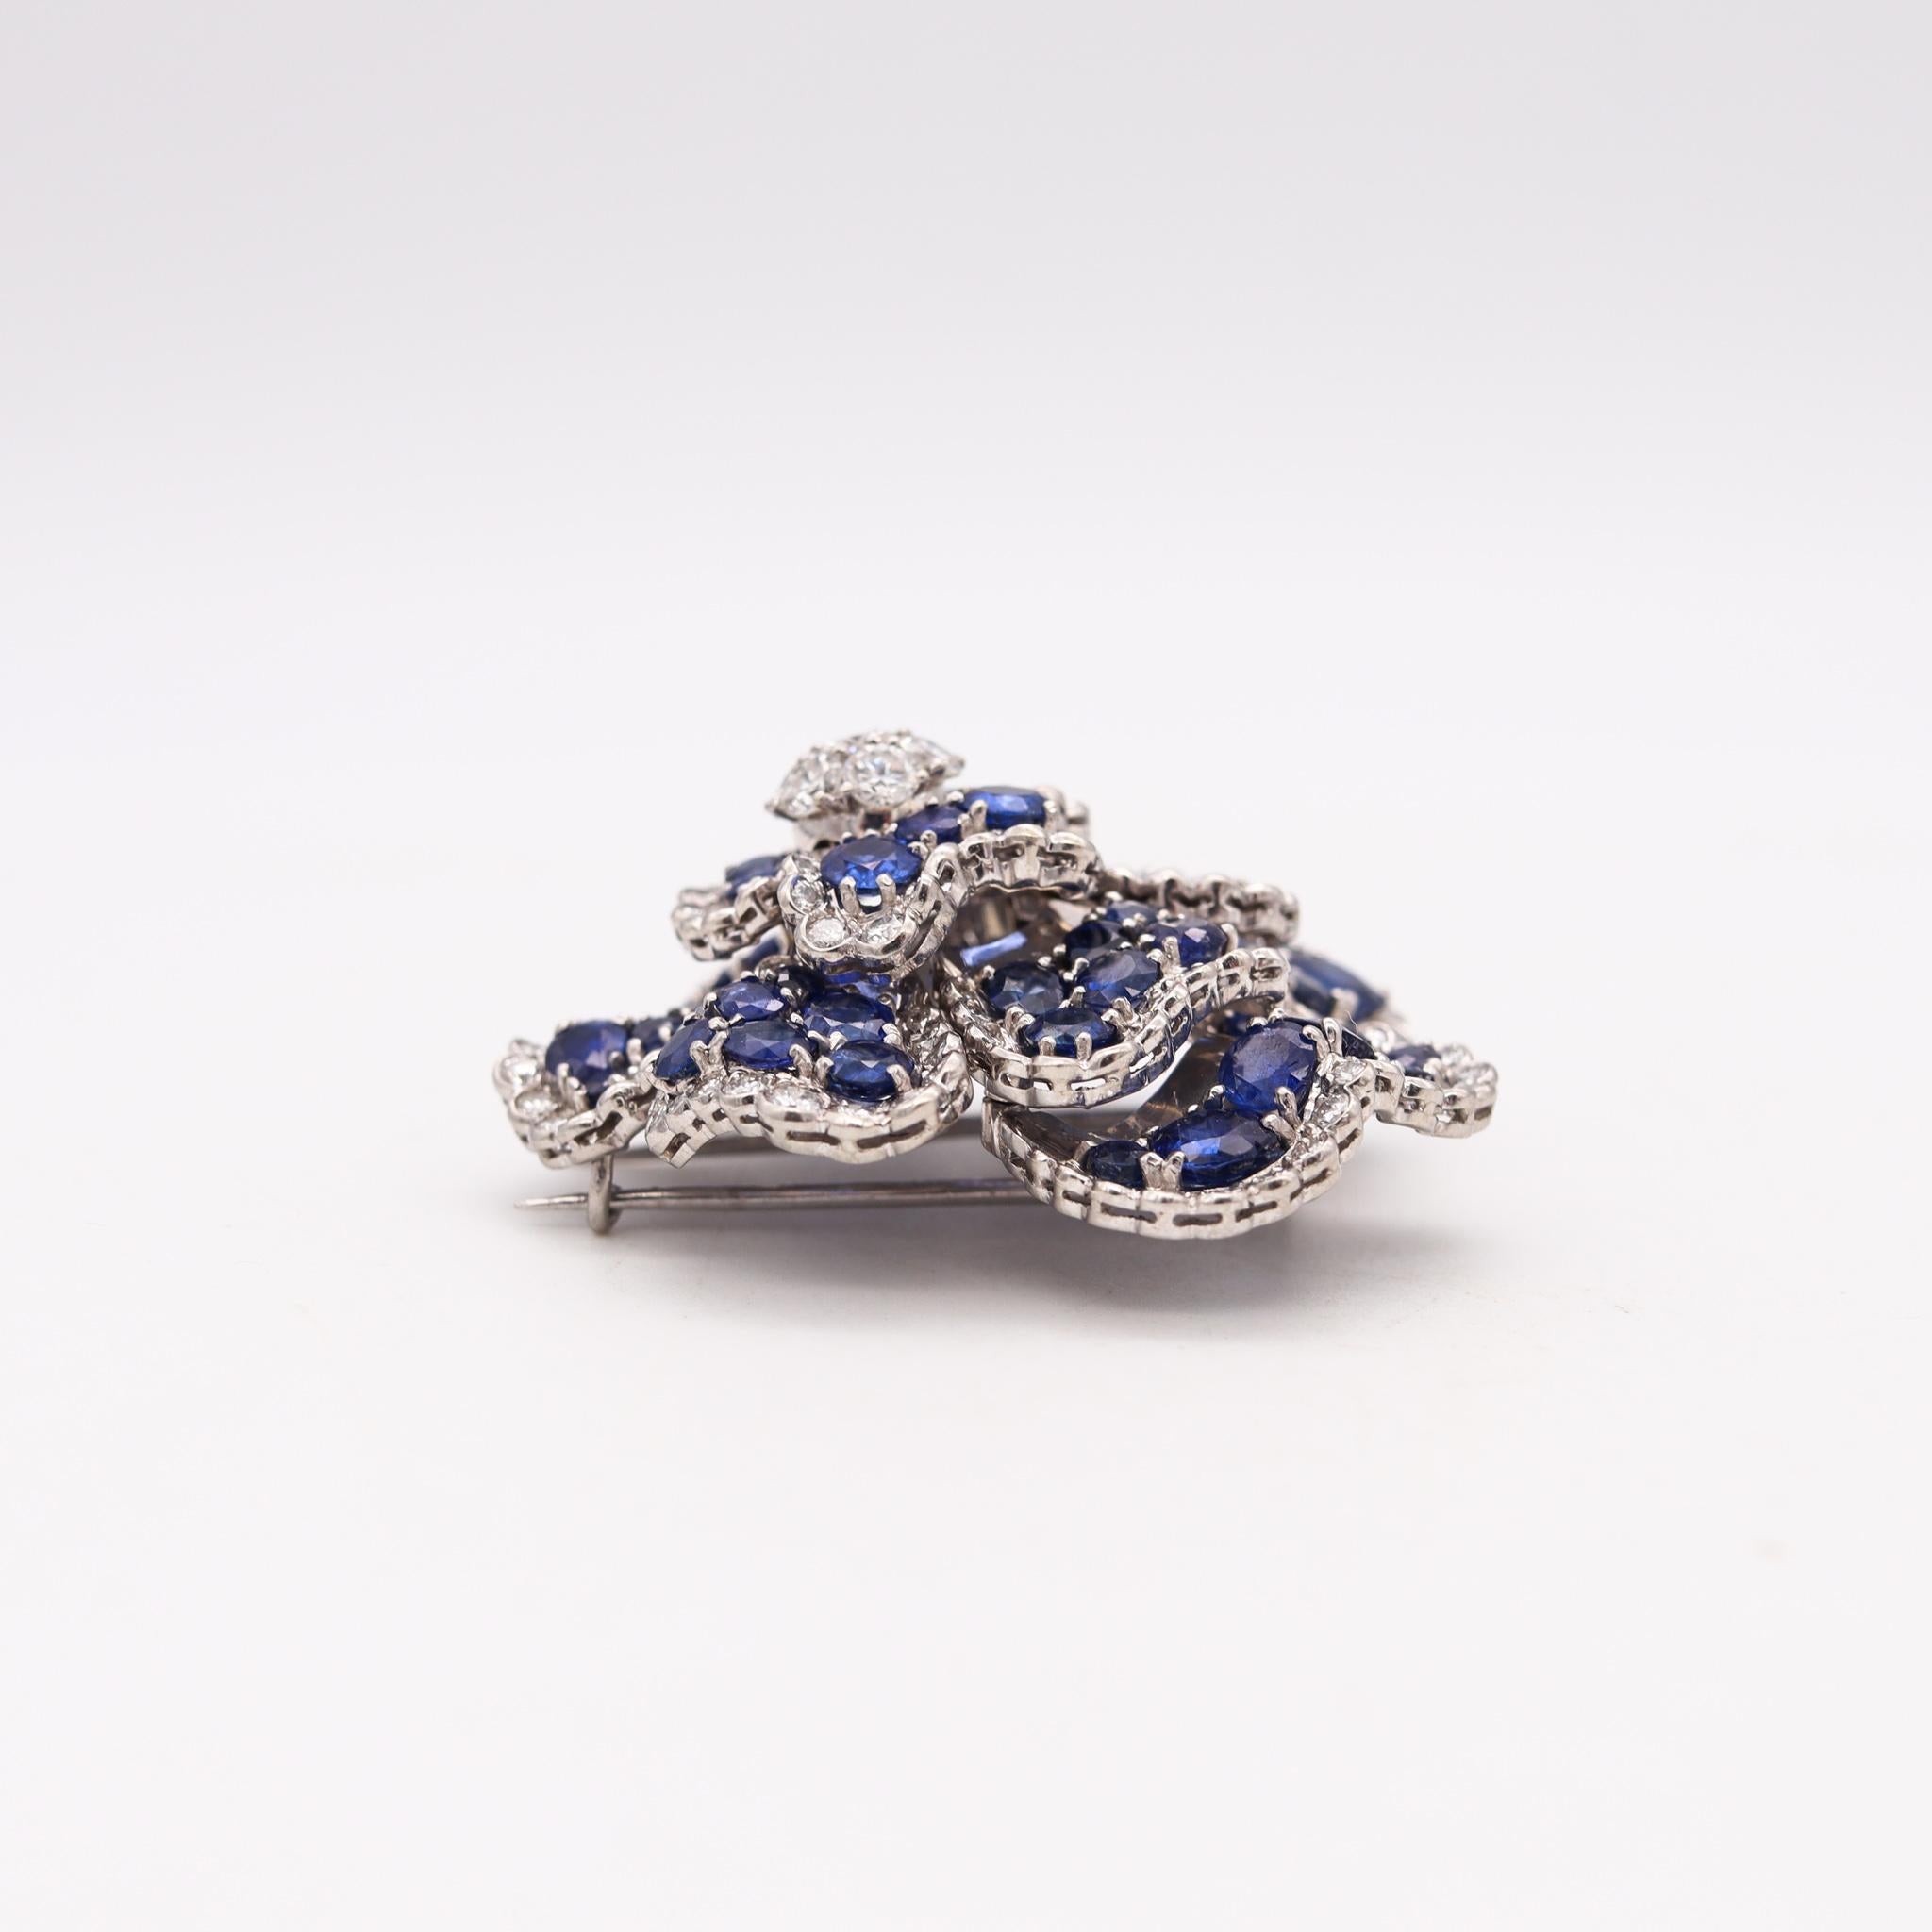 Art Deco 1930 Gia Certified Brooch Platinum with 27.85 Ctw Diamonds & Sapphires 1